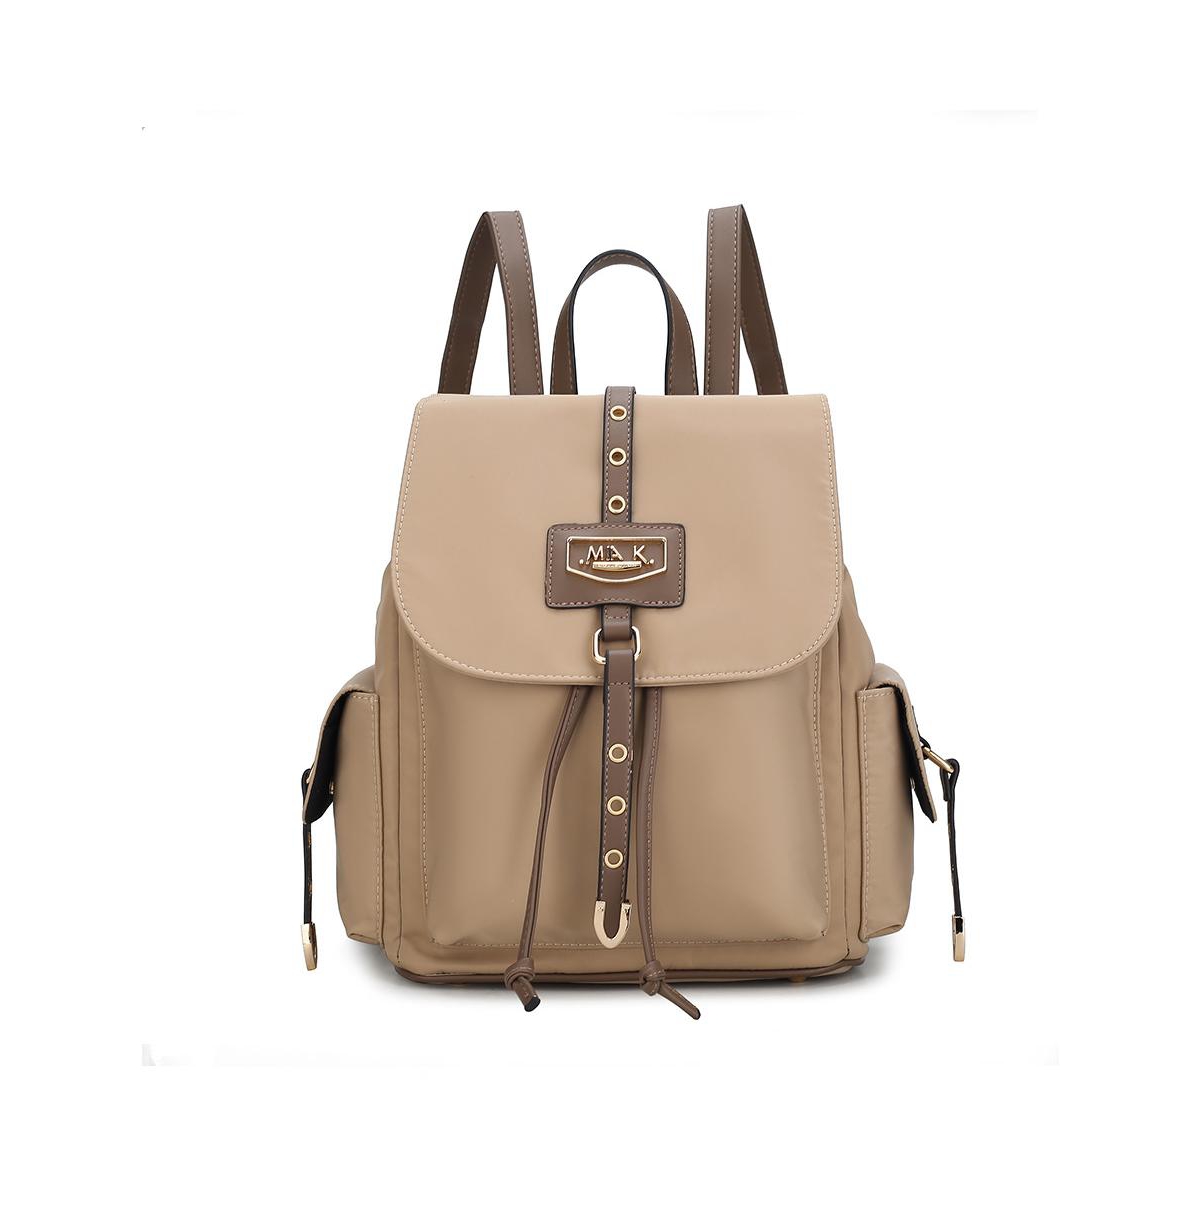 Mfk Collection Paula Backpack by Mia K. - Wine